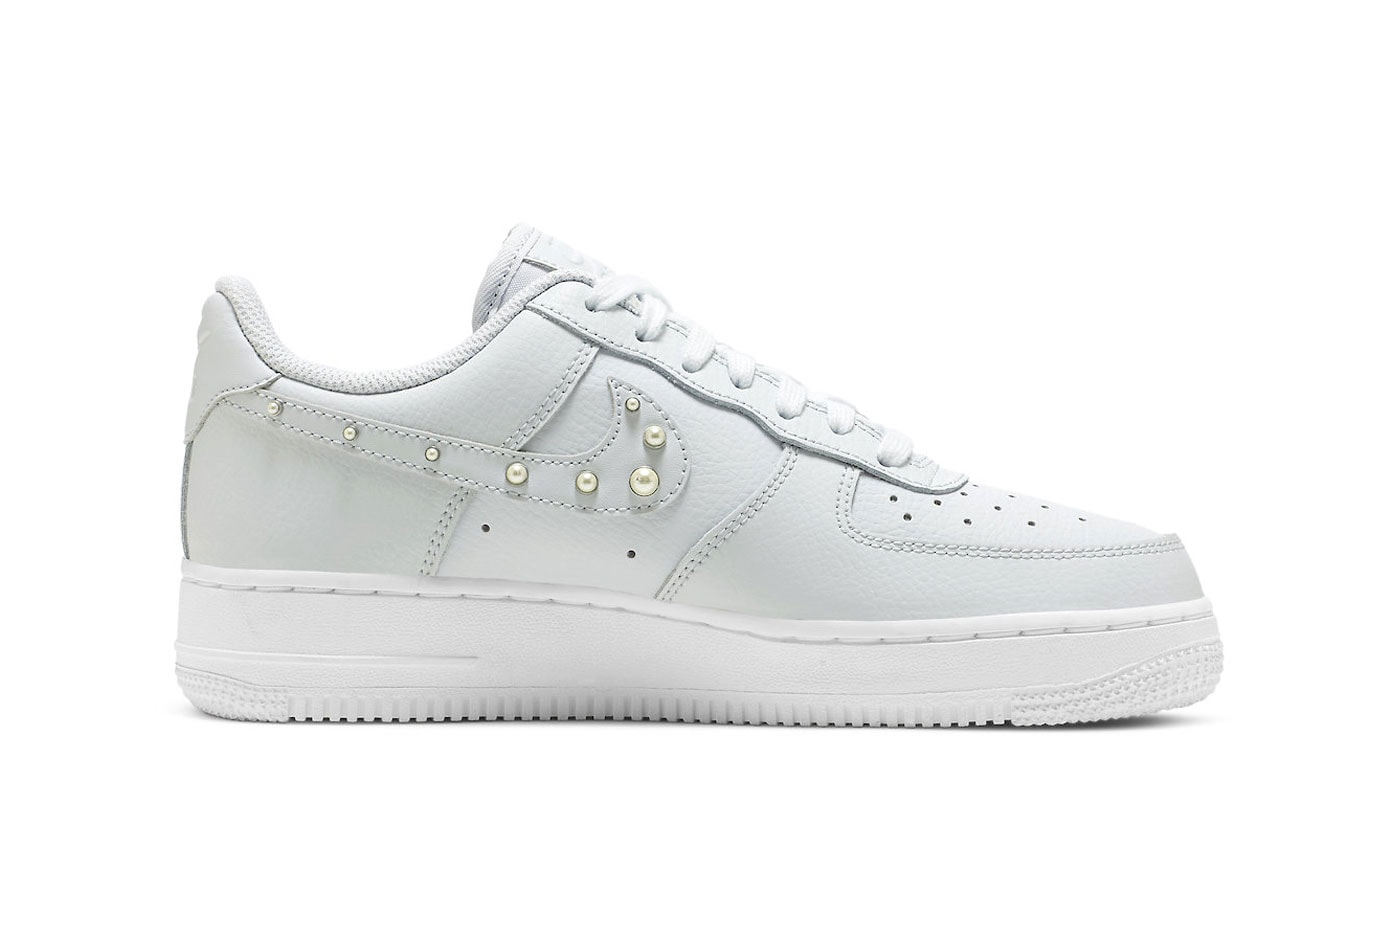 This Nike Air Force 1 Low Arrives With Pearl Studded Swoosh DV3810 001 light grey soft gray white tumbled leather release info price date